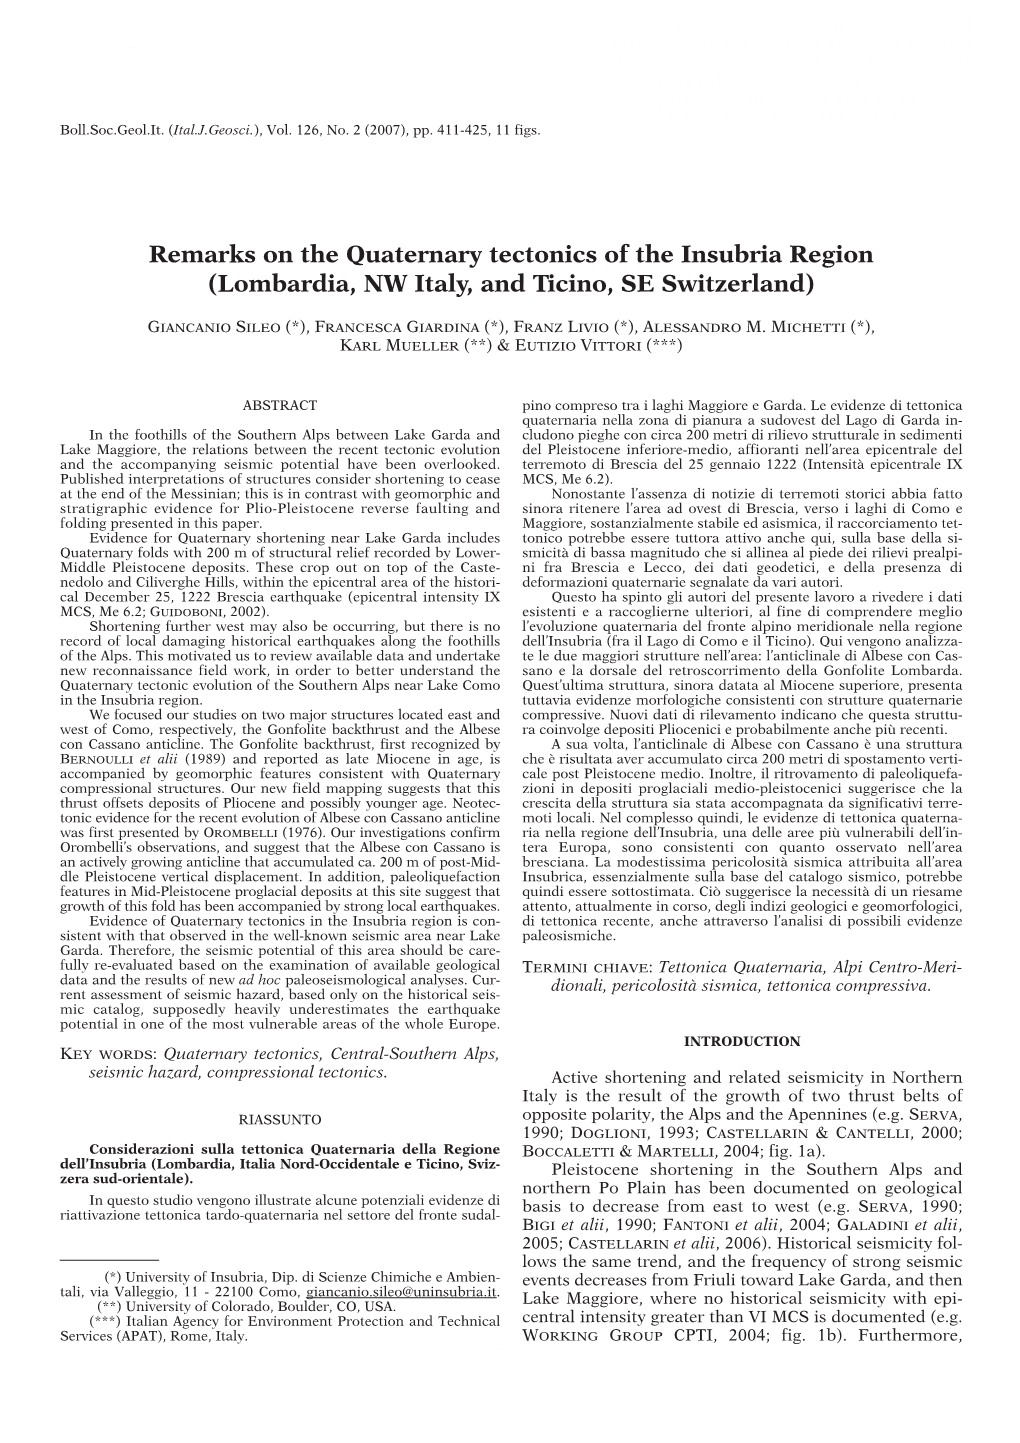 Remarks on the Quaternary Tectonics of the Insubria Region (Lombardia, NW Italy, and Ticino, SE Switzerland)